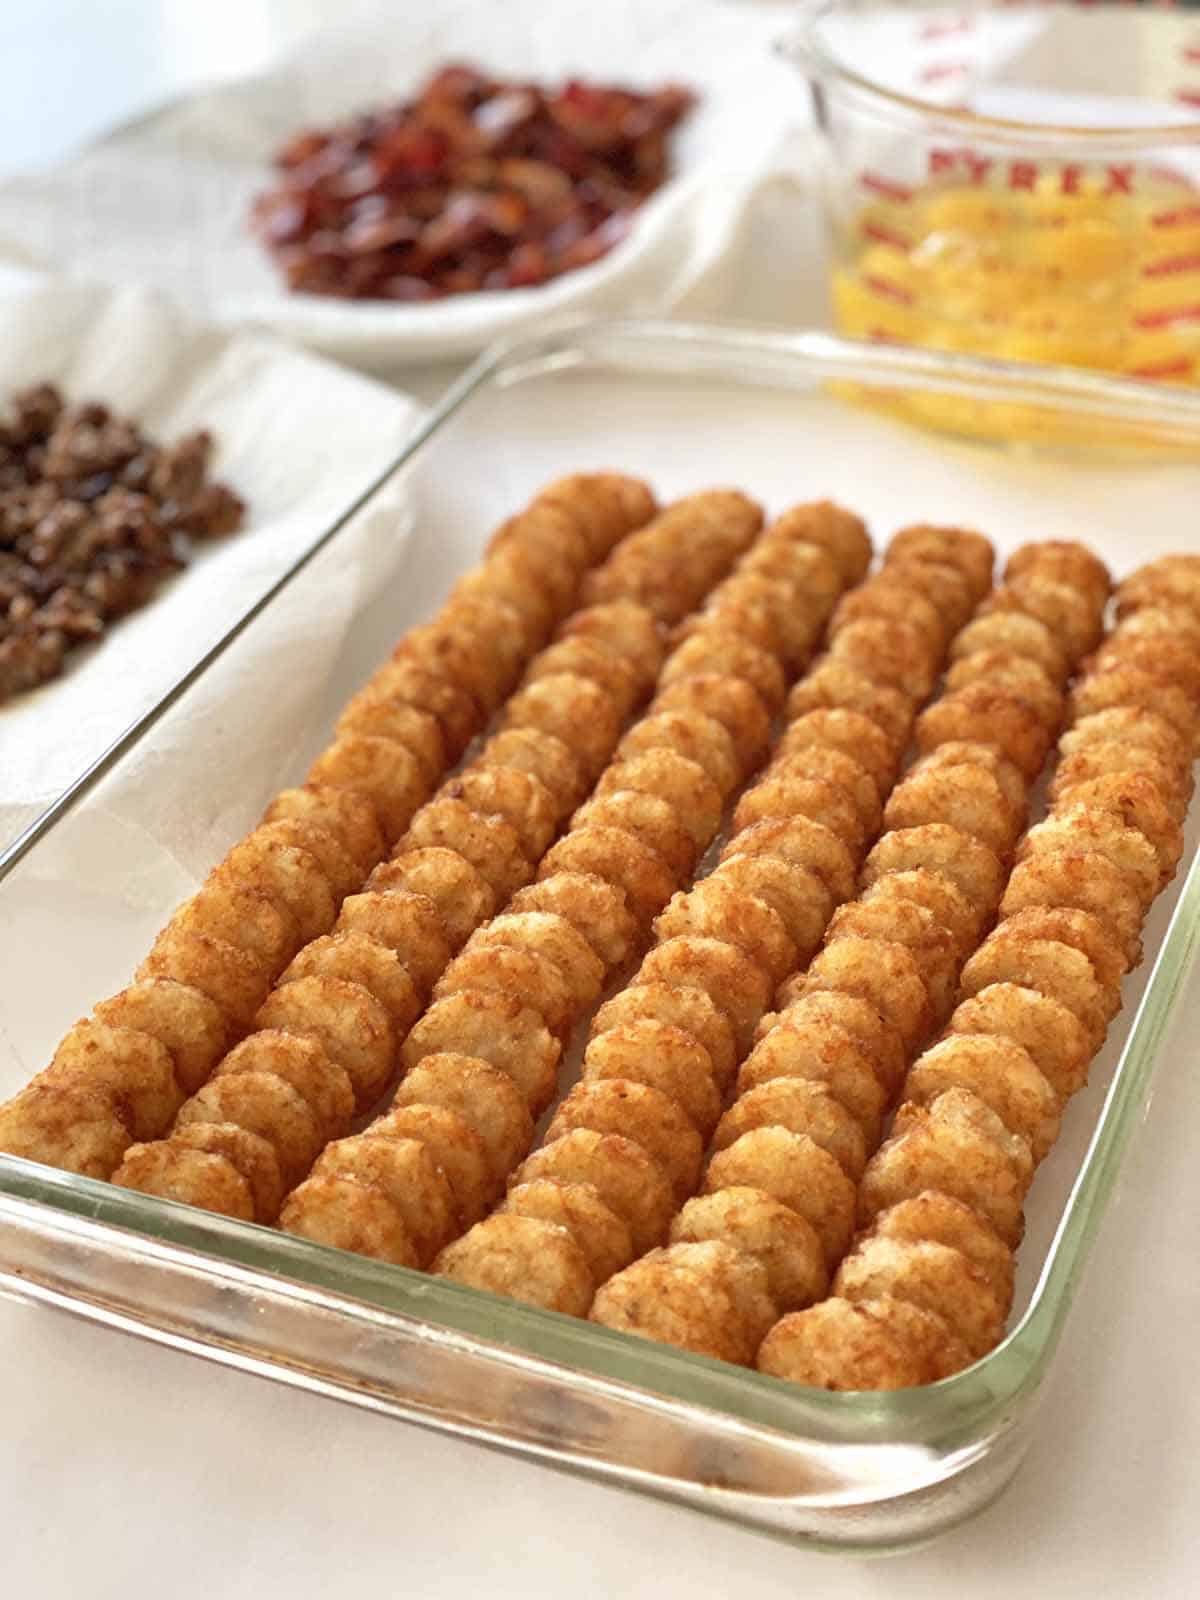 Tater tots arranged in a glass baking dish, with plates of cooked sausage and bacon and a measuring cup of eggs in the background.